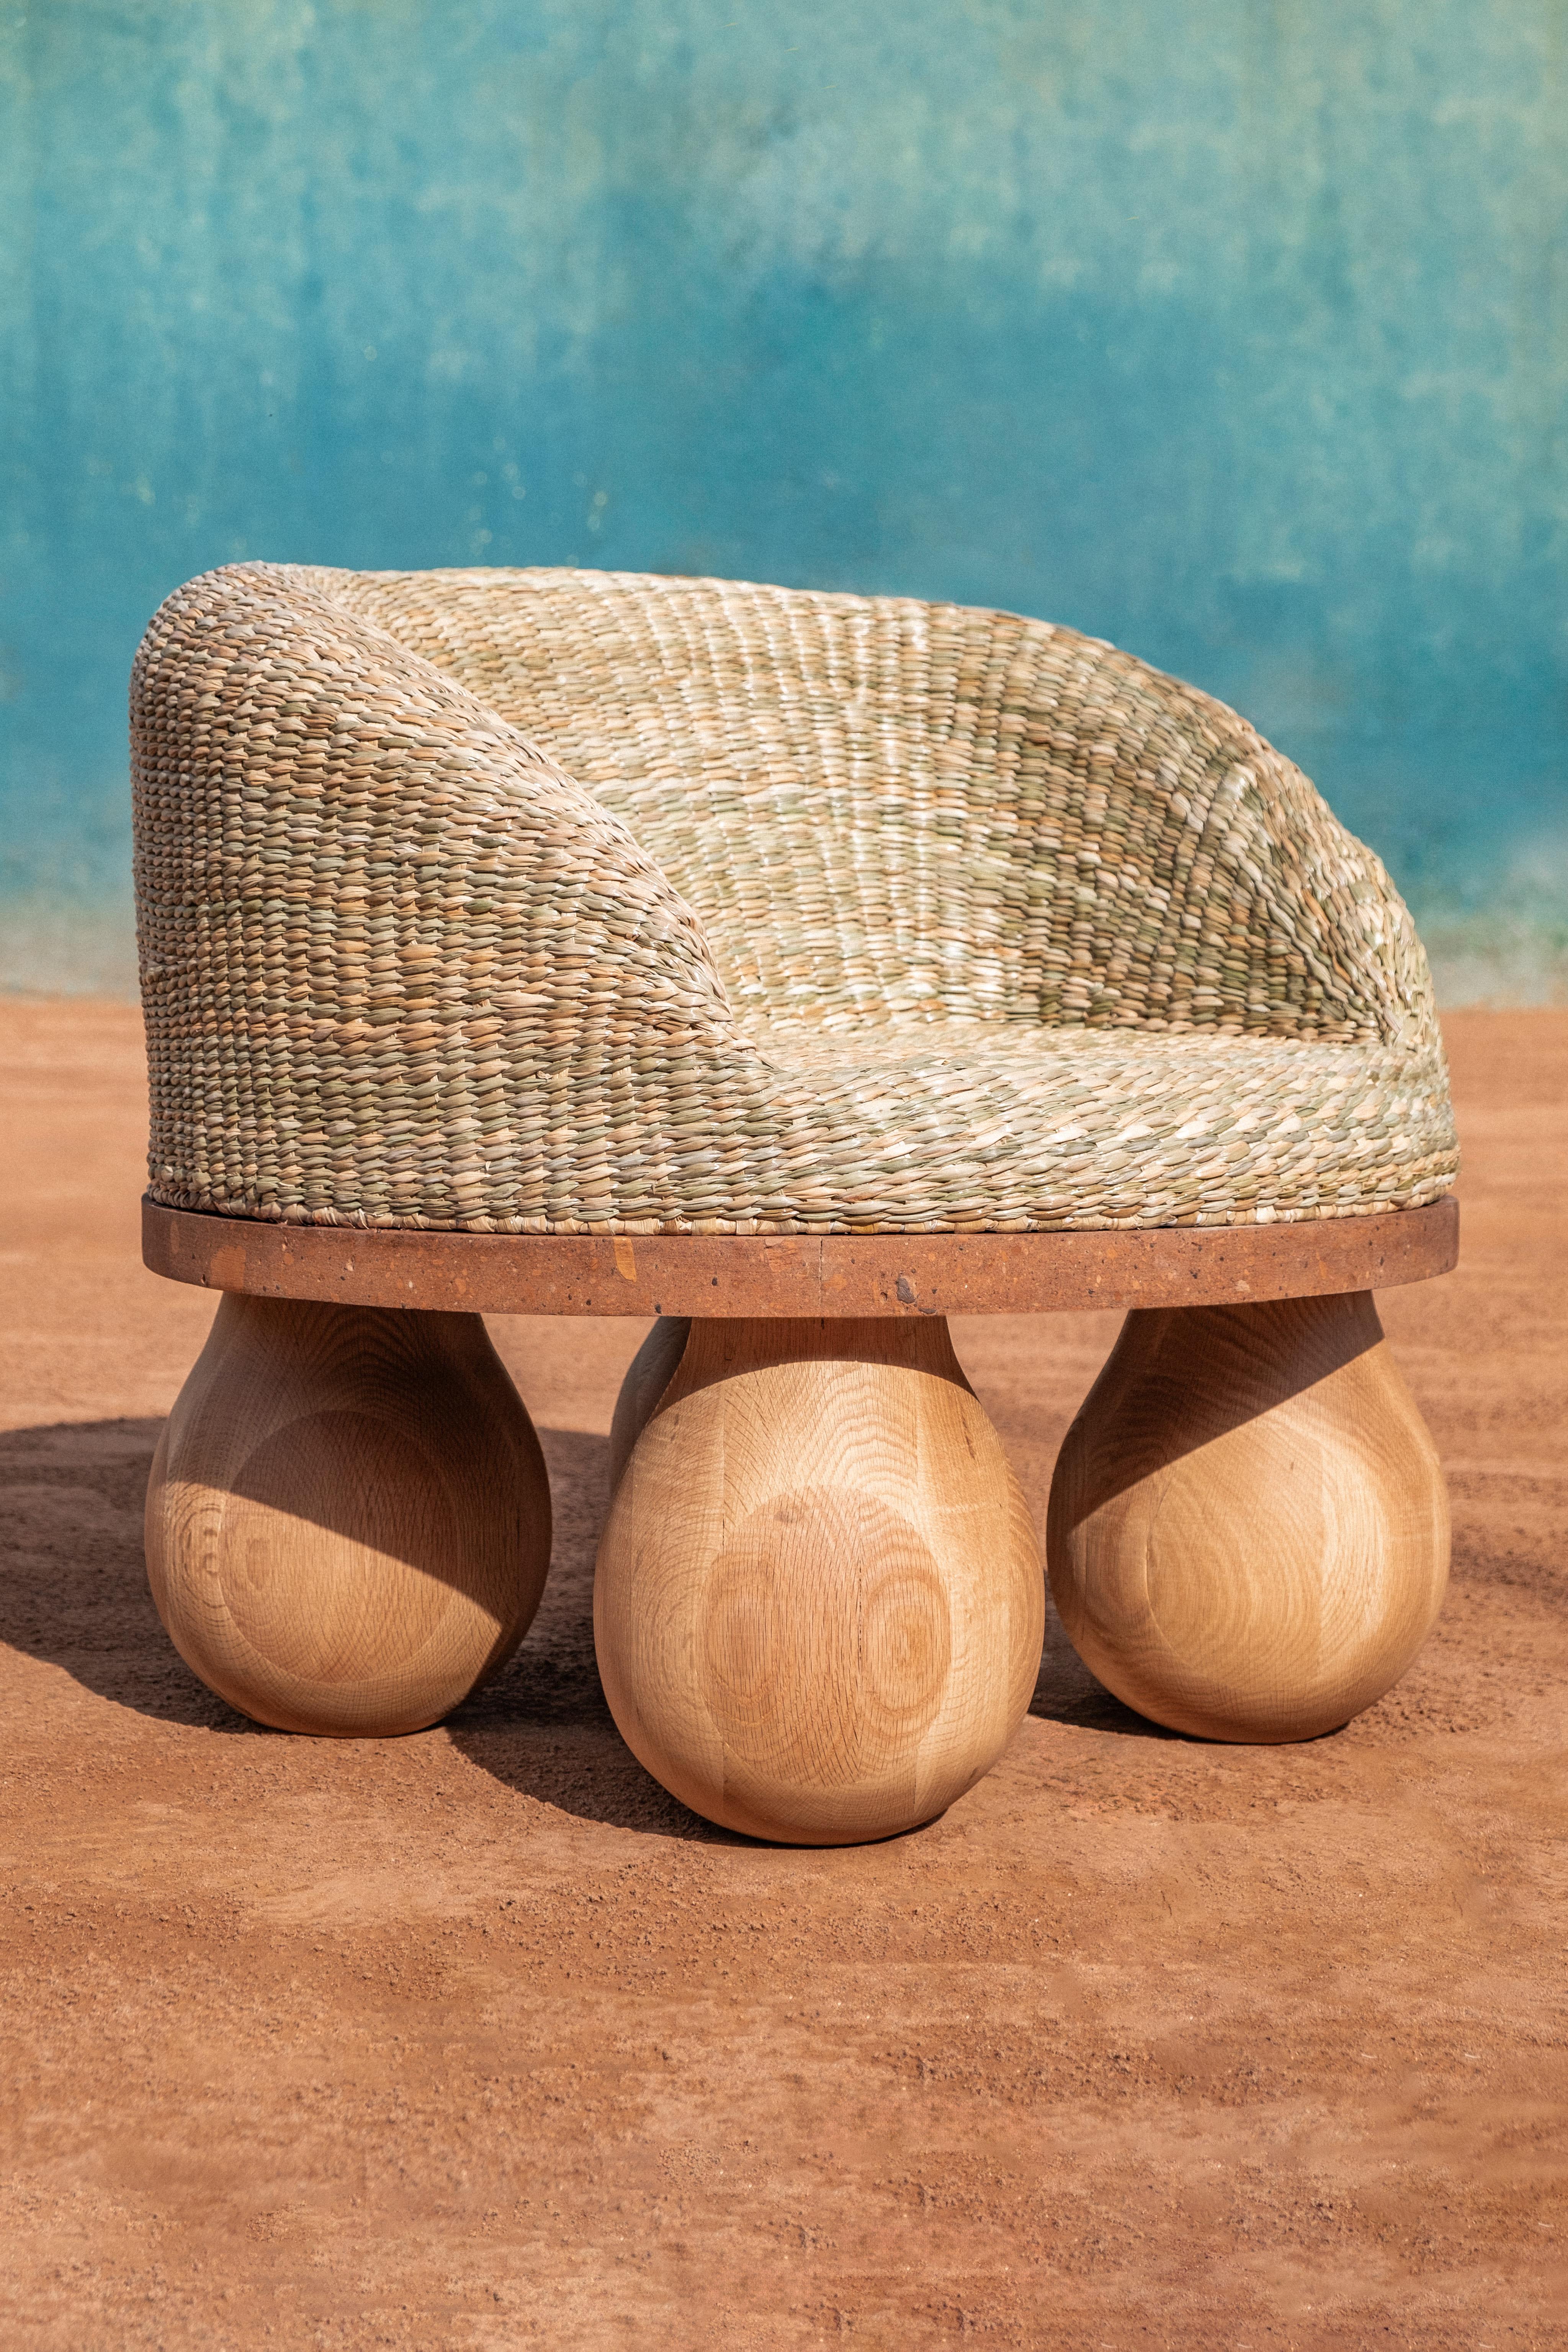 Waje Chair by Comuna MX
Dimensions: W 80 x D 80 x H 75 cm
Materials: Orange Cantera Stone, Chuspata Weaving.  
Weight: 50 Kg.

Some parts of this product are handmade, so they may vary in color, shape, texture, and size.
Waje is a furniture